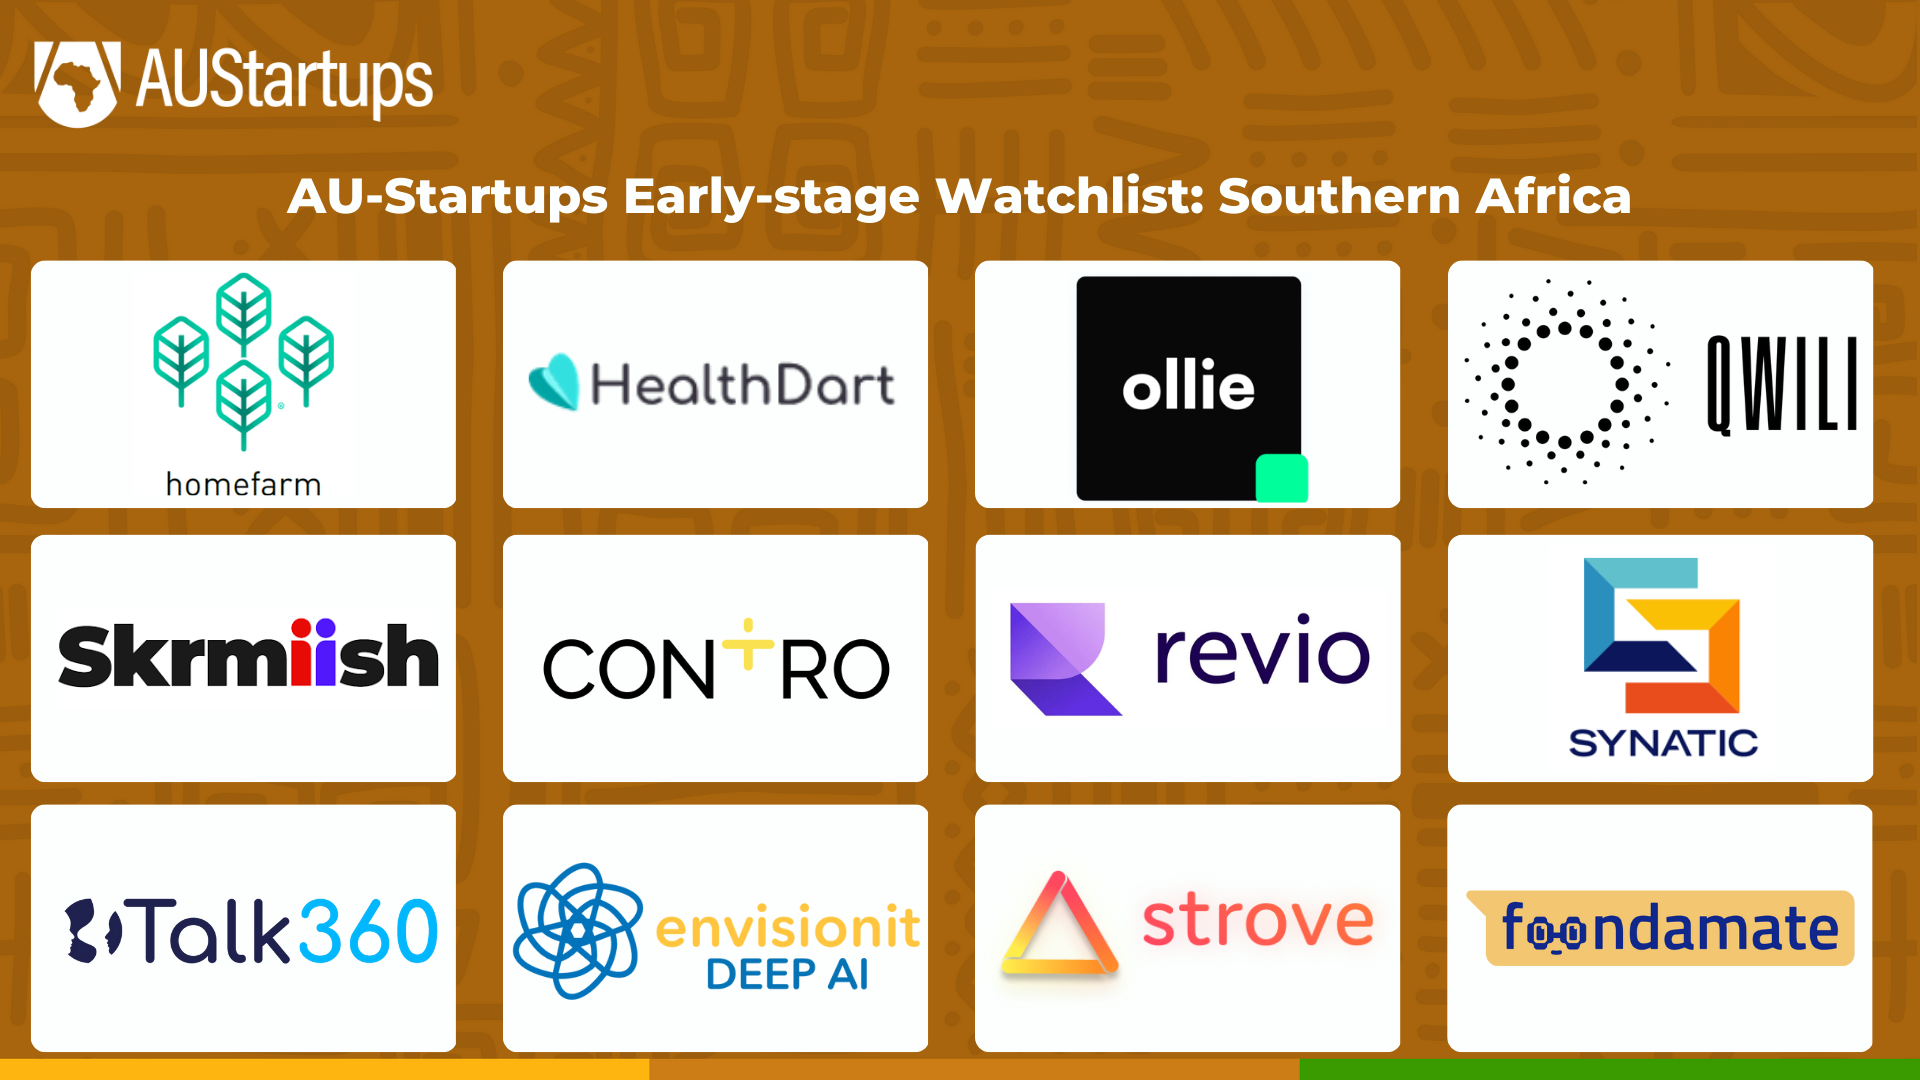 AU-Startups Early-stage Watchlist South Africa (1)